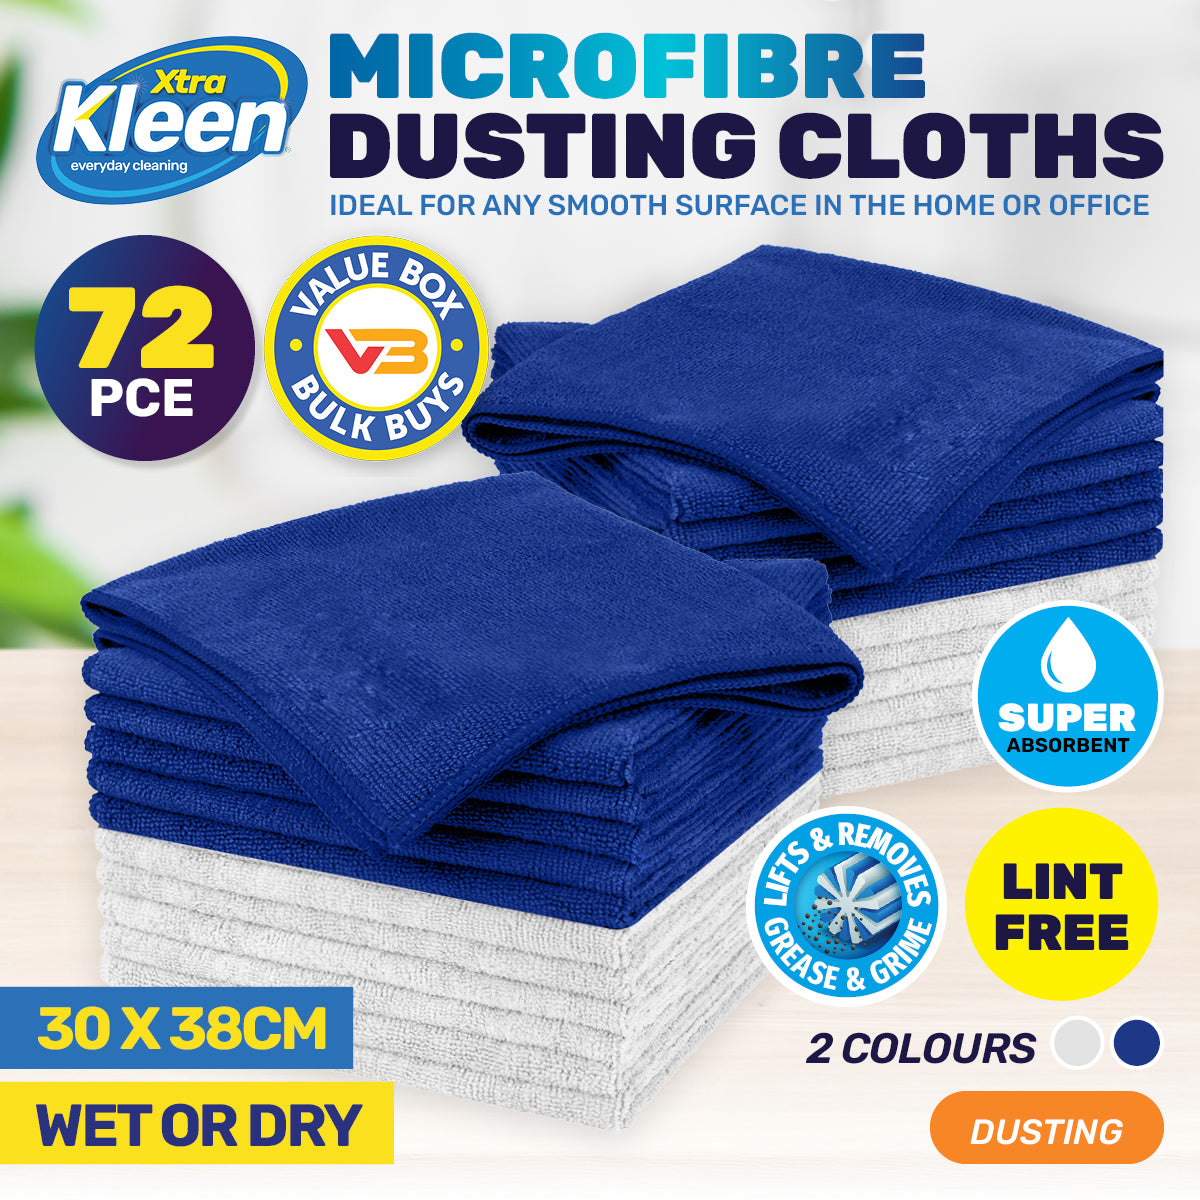 Microfibre Cleaning Cloths for dust mite allergies